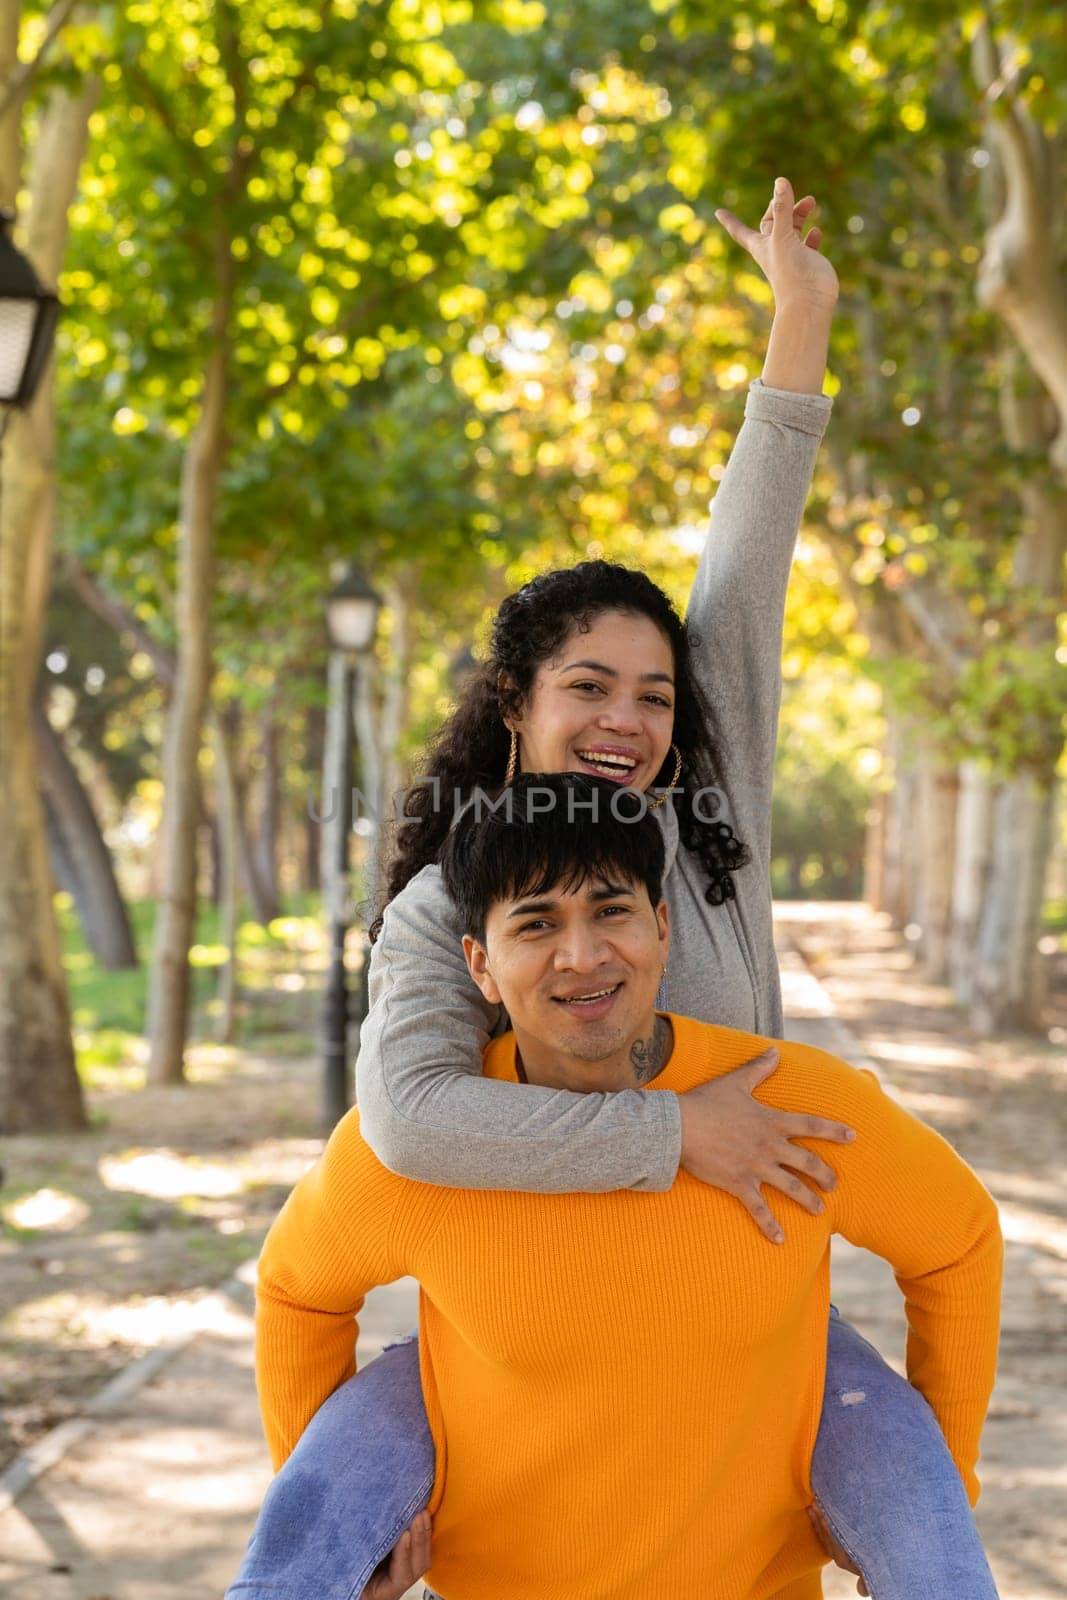 Young couple having fun at a park. Successful woman in piggyback ride with positive mood.